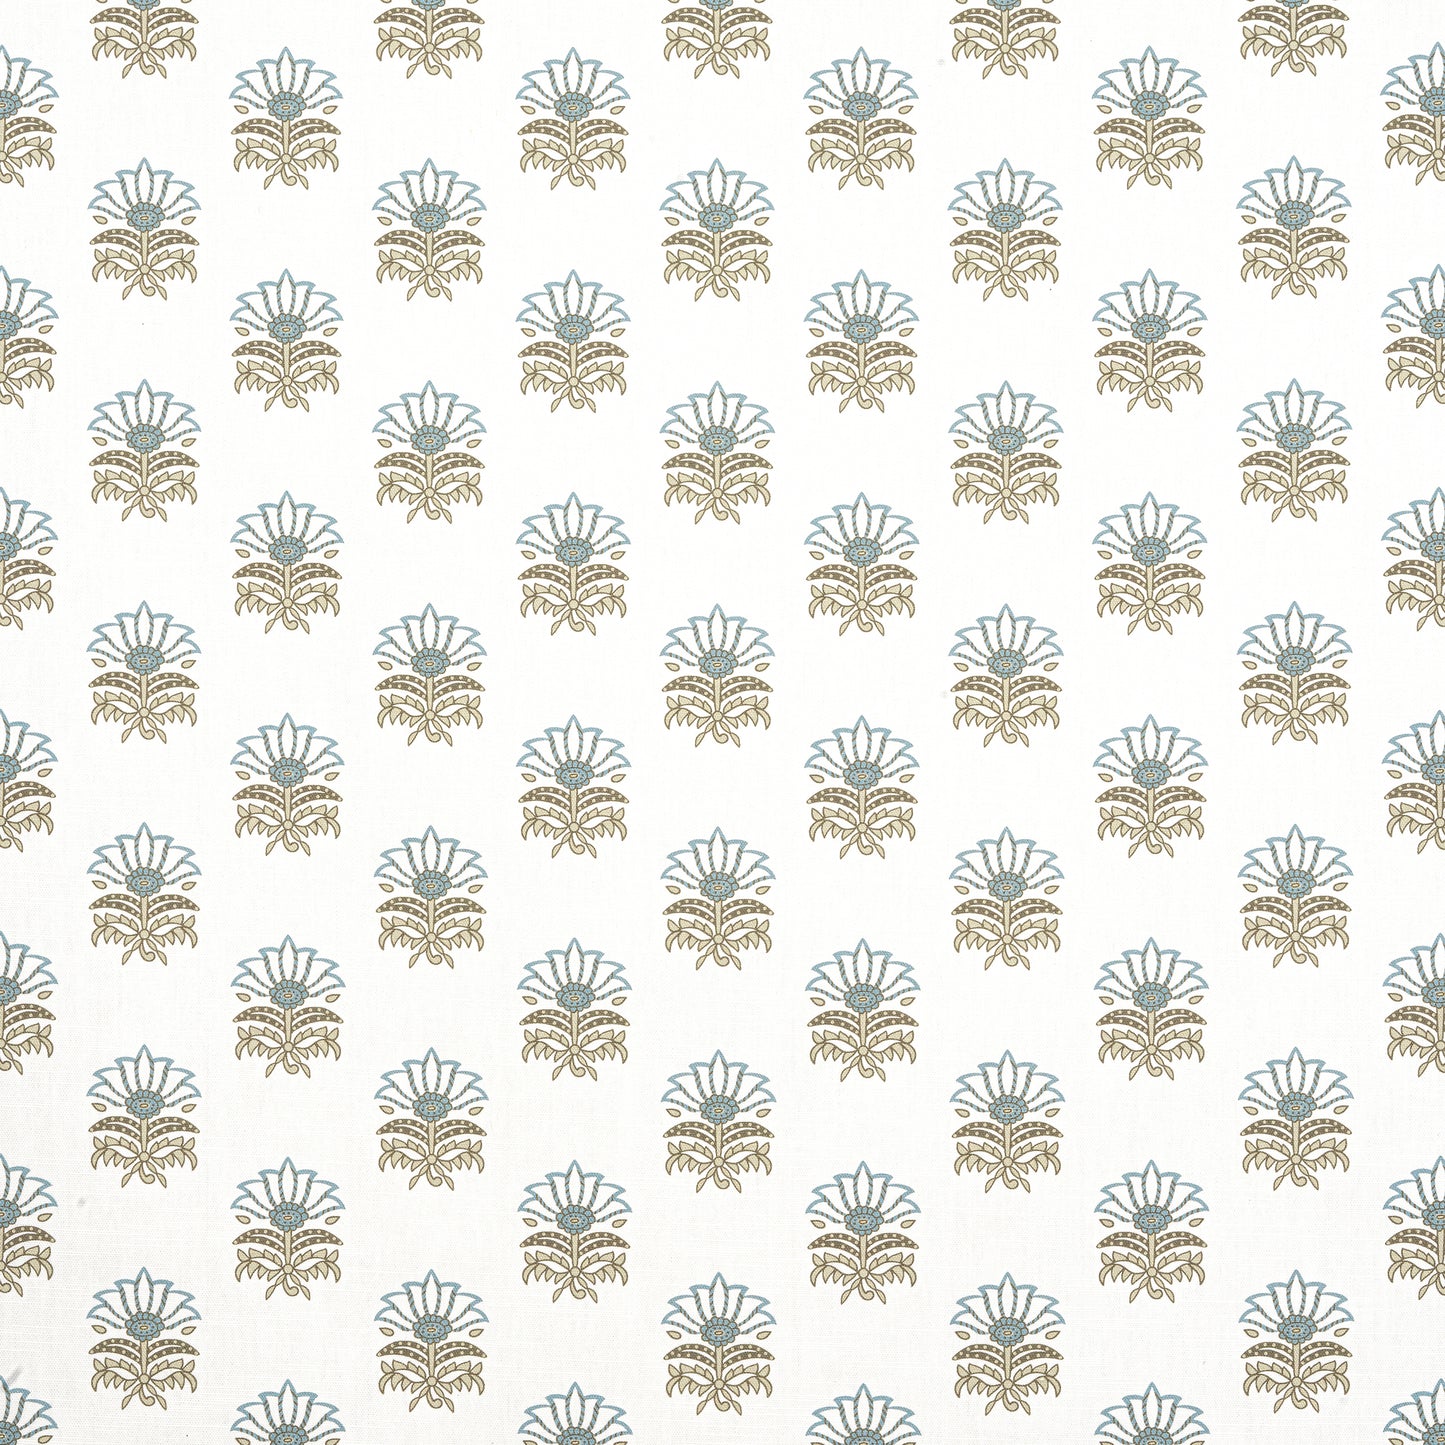 Purchase  Ann French Fabric Item# AF15159  pattern name  Milford